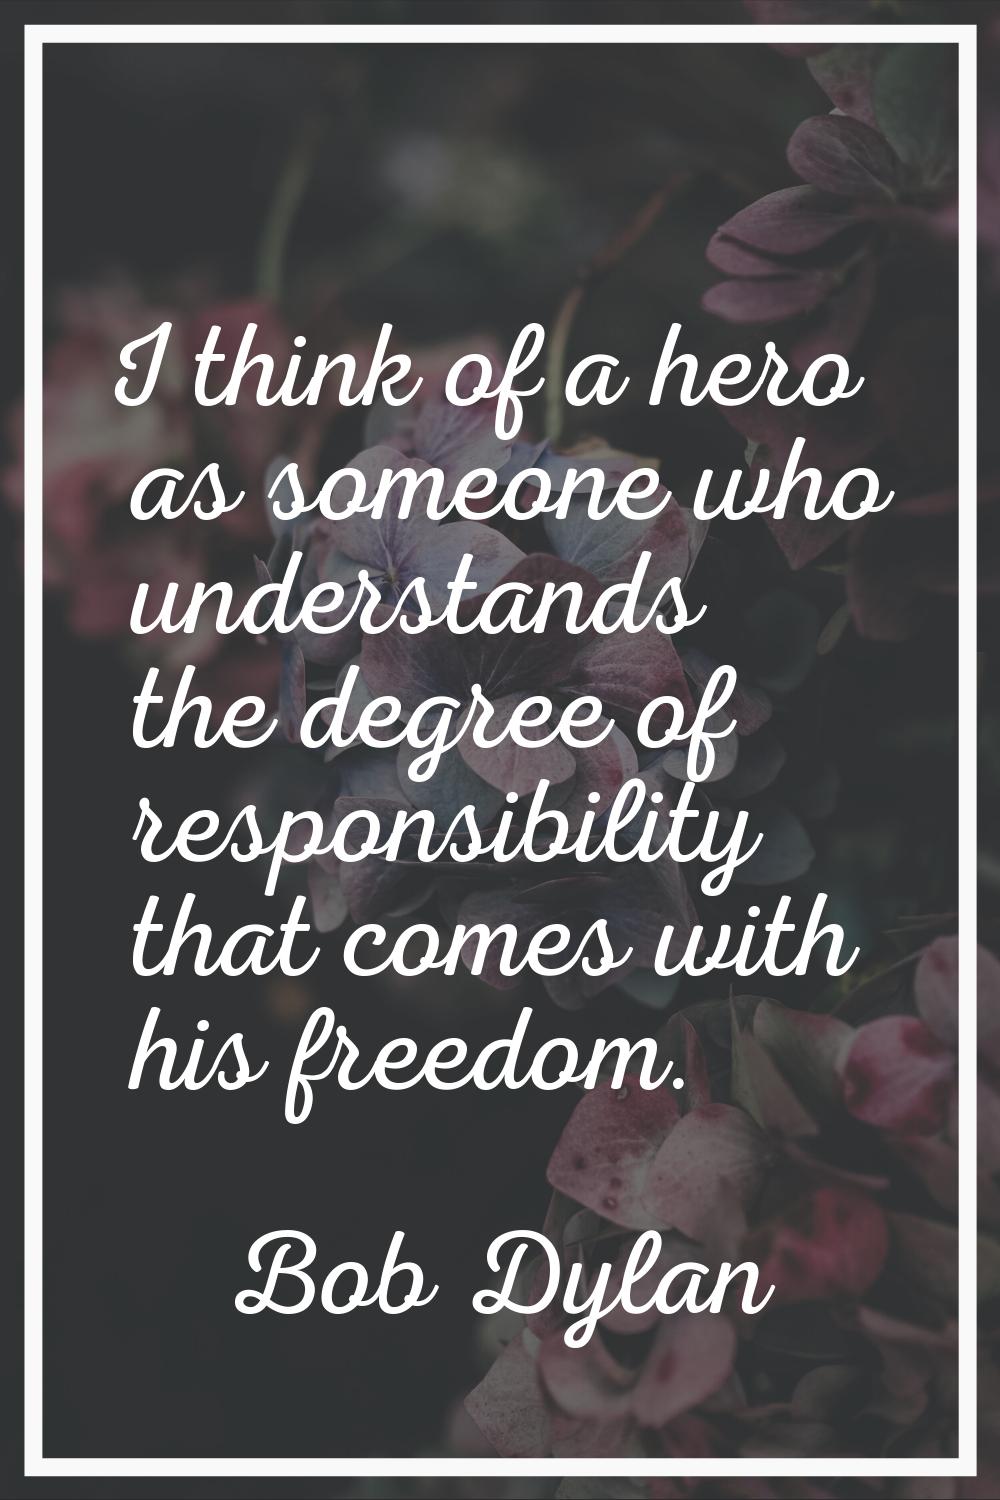 I think of a hero as someone who understands the degree of responsibility that comes with his freed